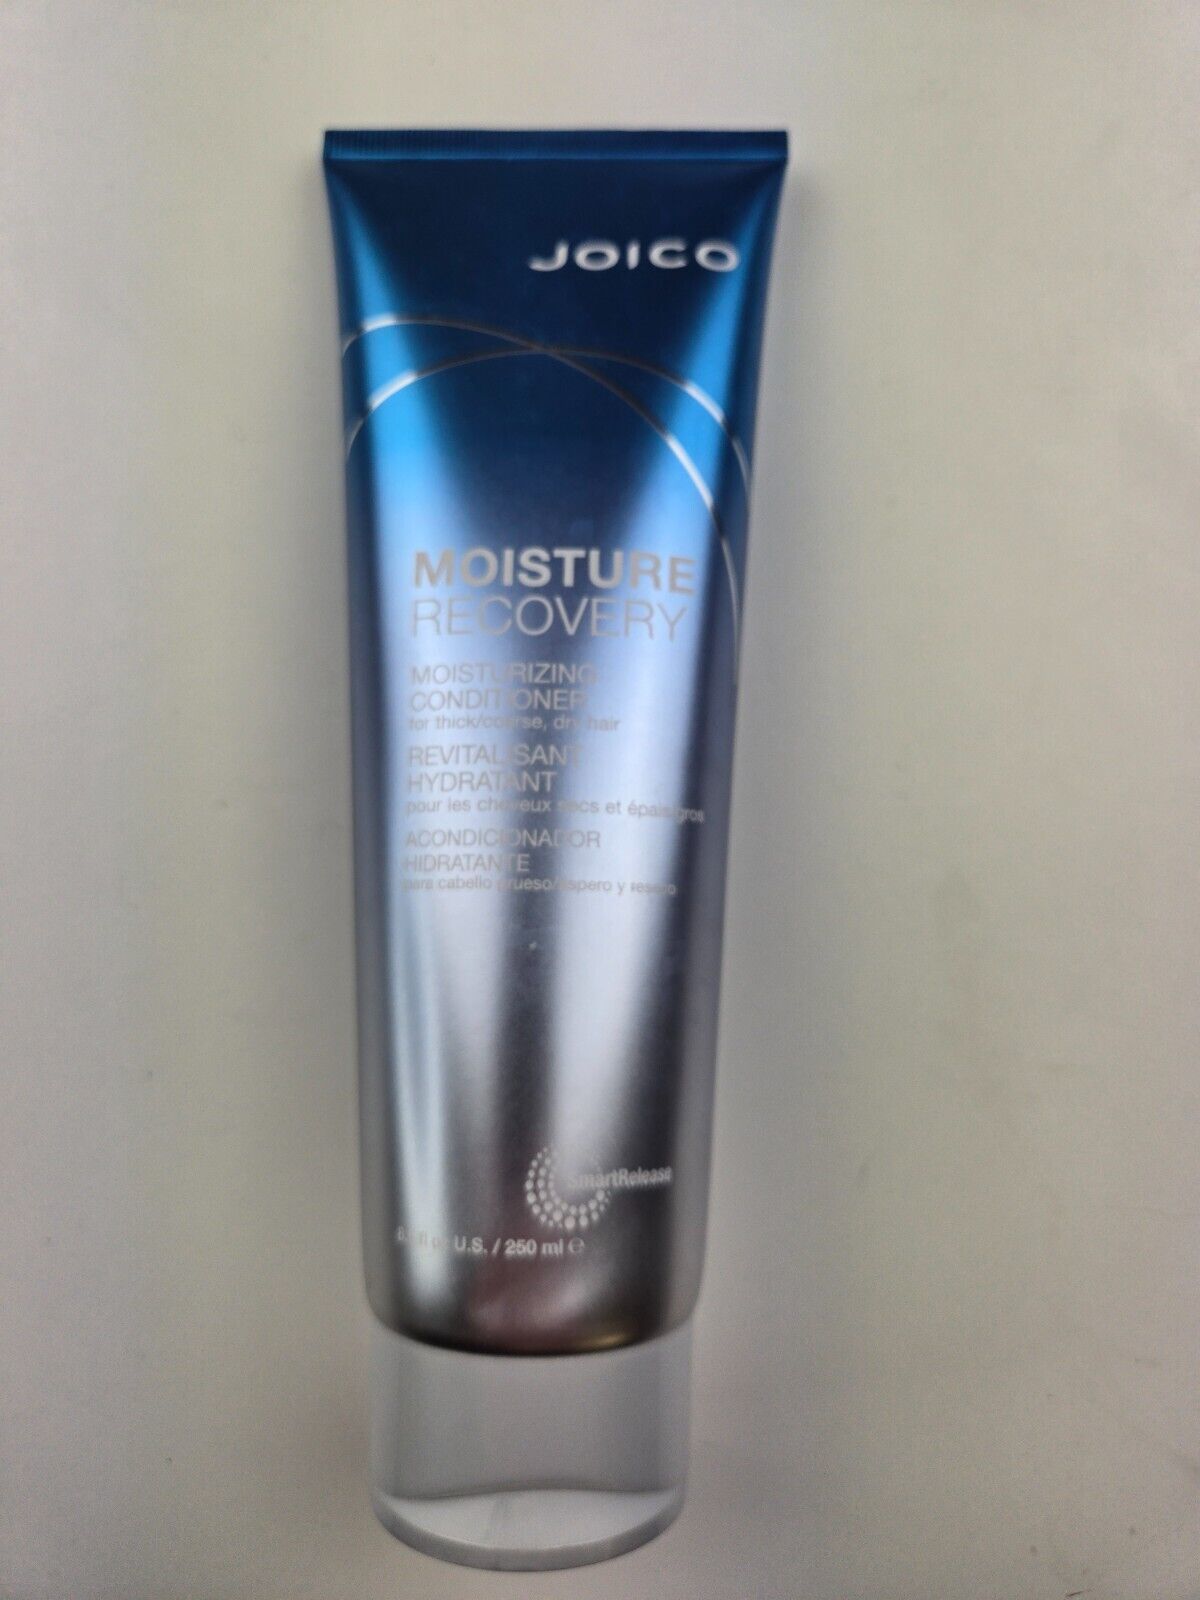 Primary image for Joico Moisture Recovery Moisturizing Conditioner | For Thick, Coarse, Dry Hair